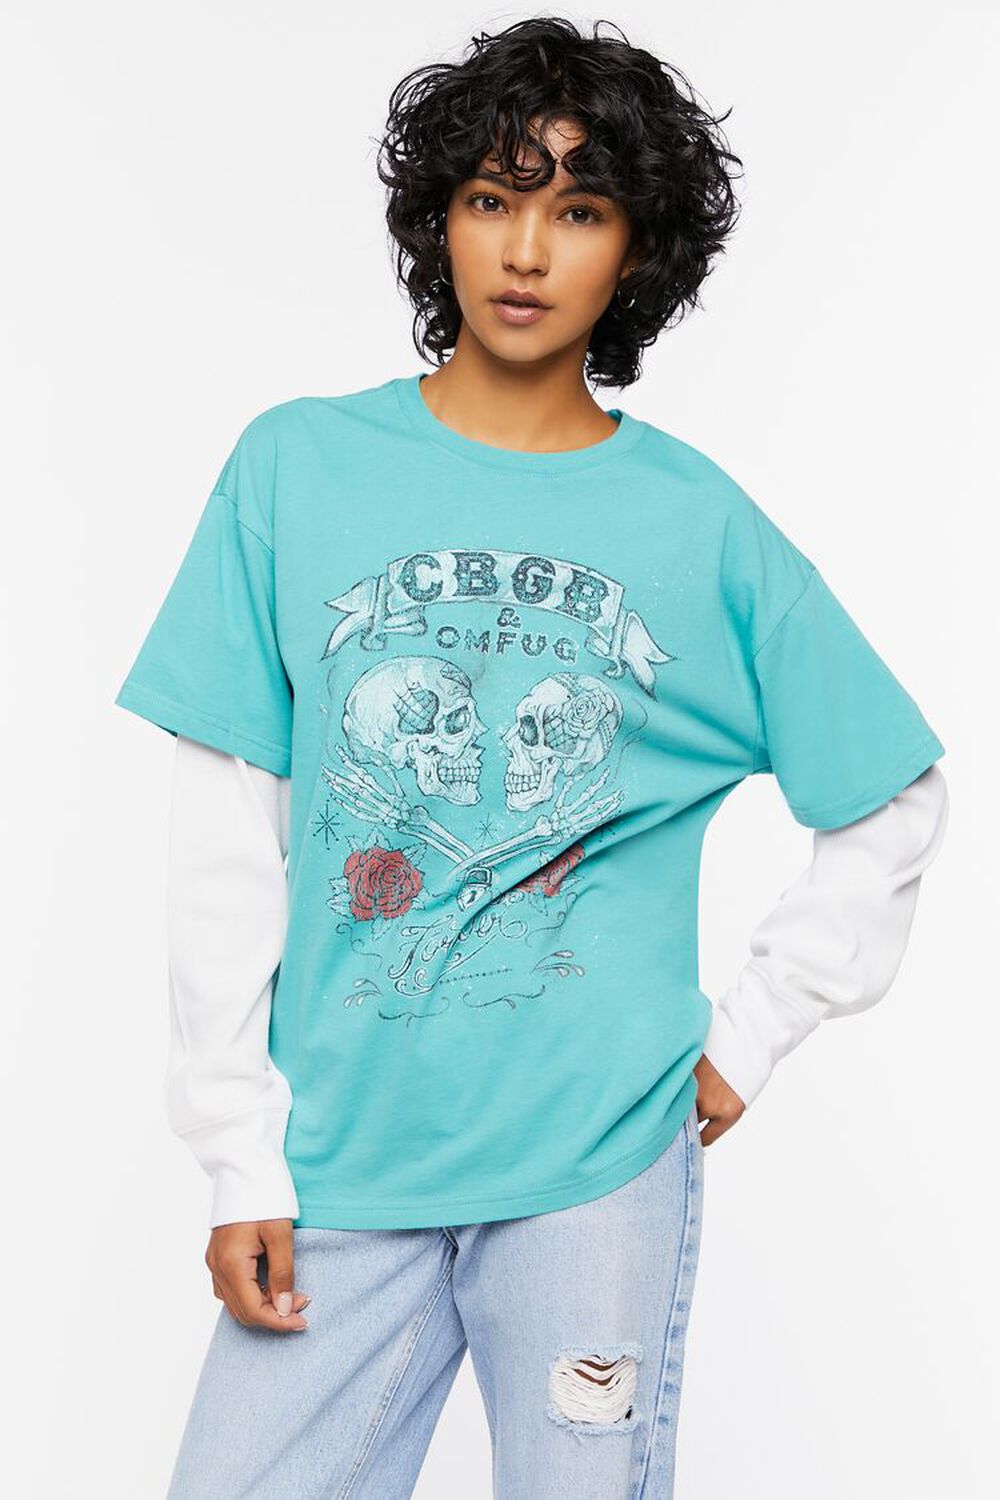 CBGB & OMFUG Forever Graphic Combo Tee, image 1